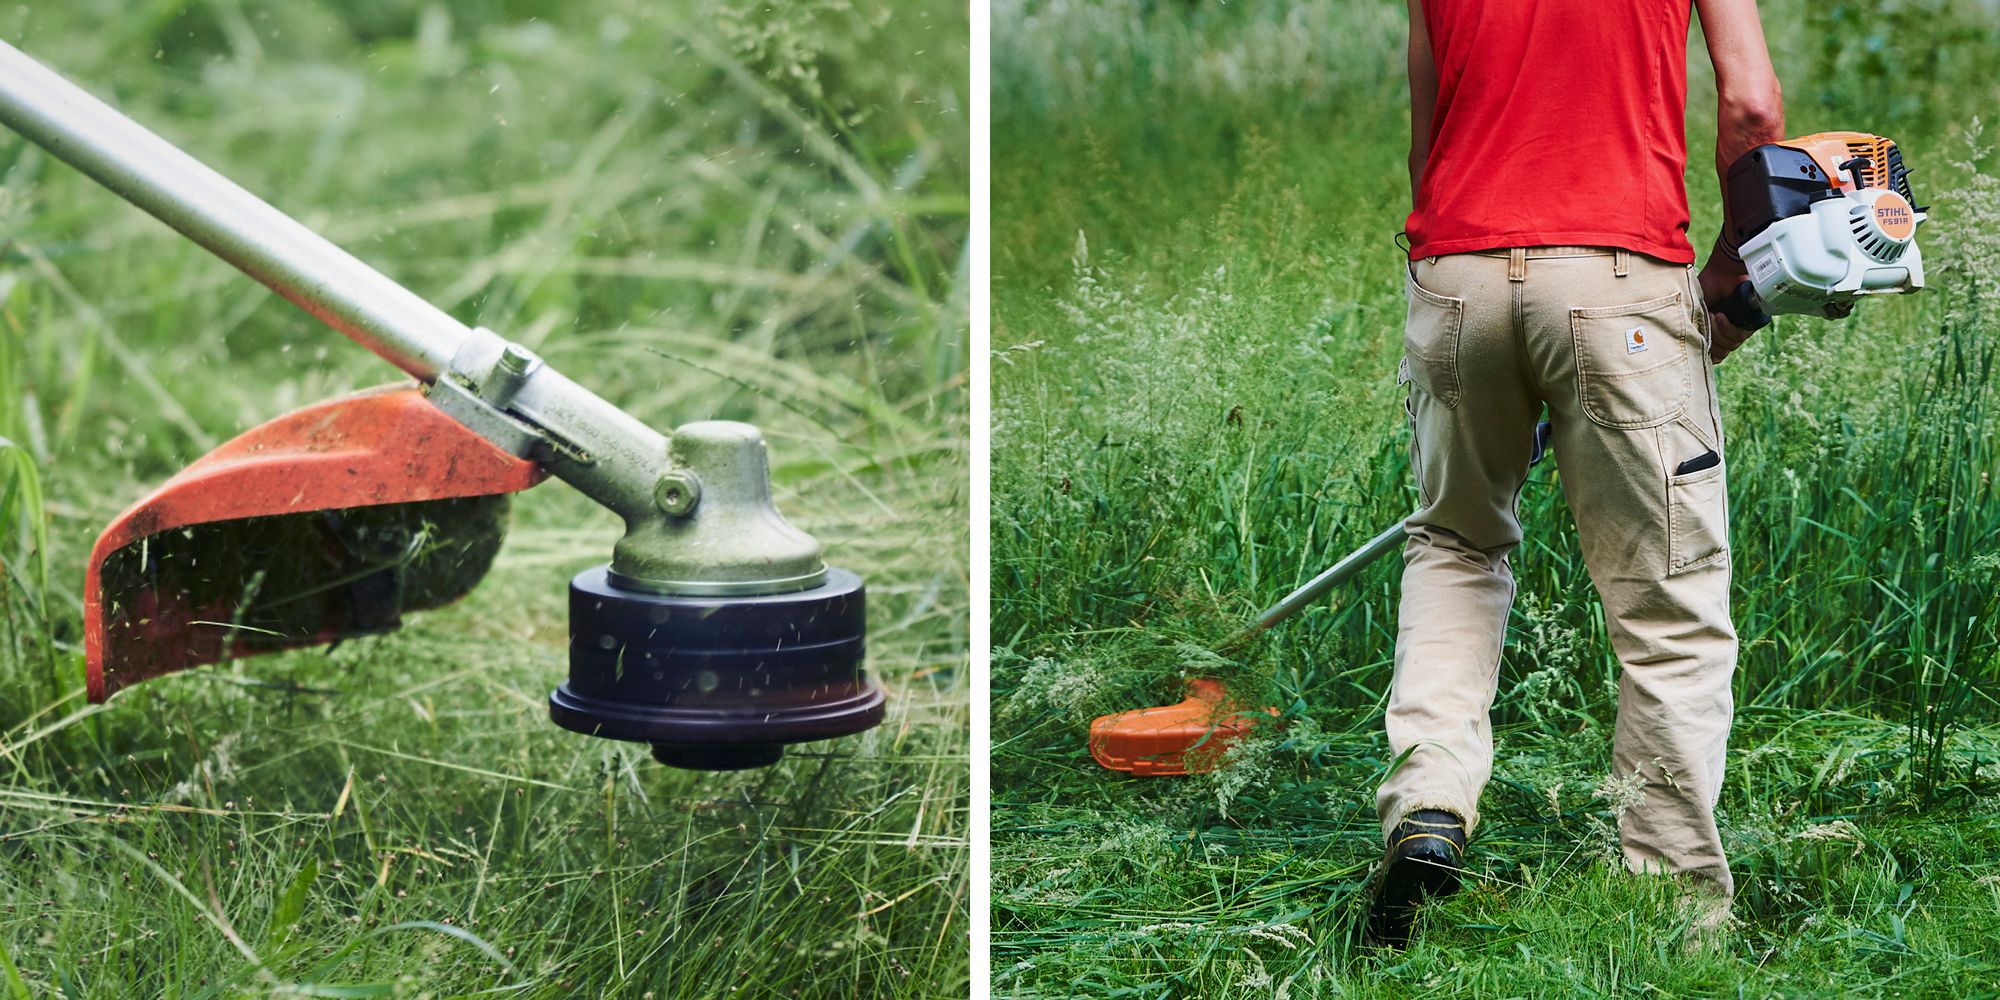 Does Ridgid make a weed eater?